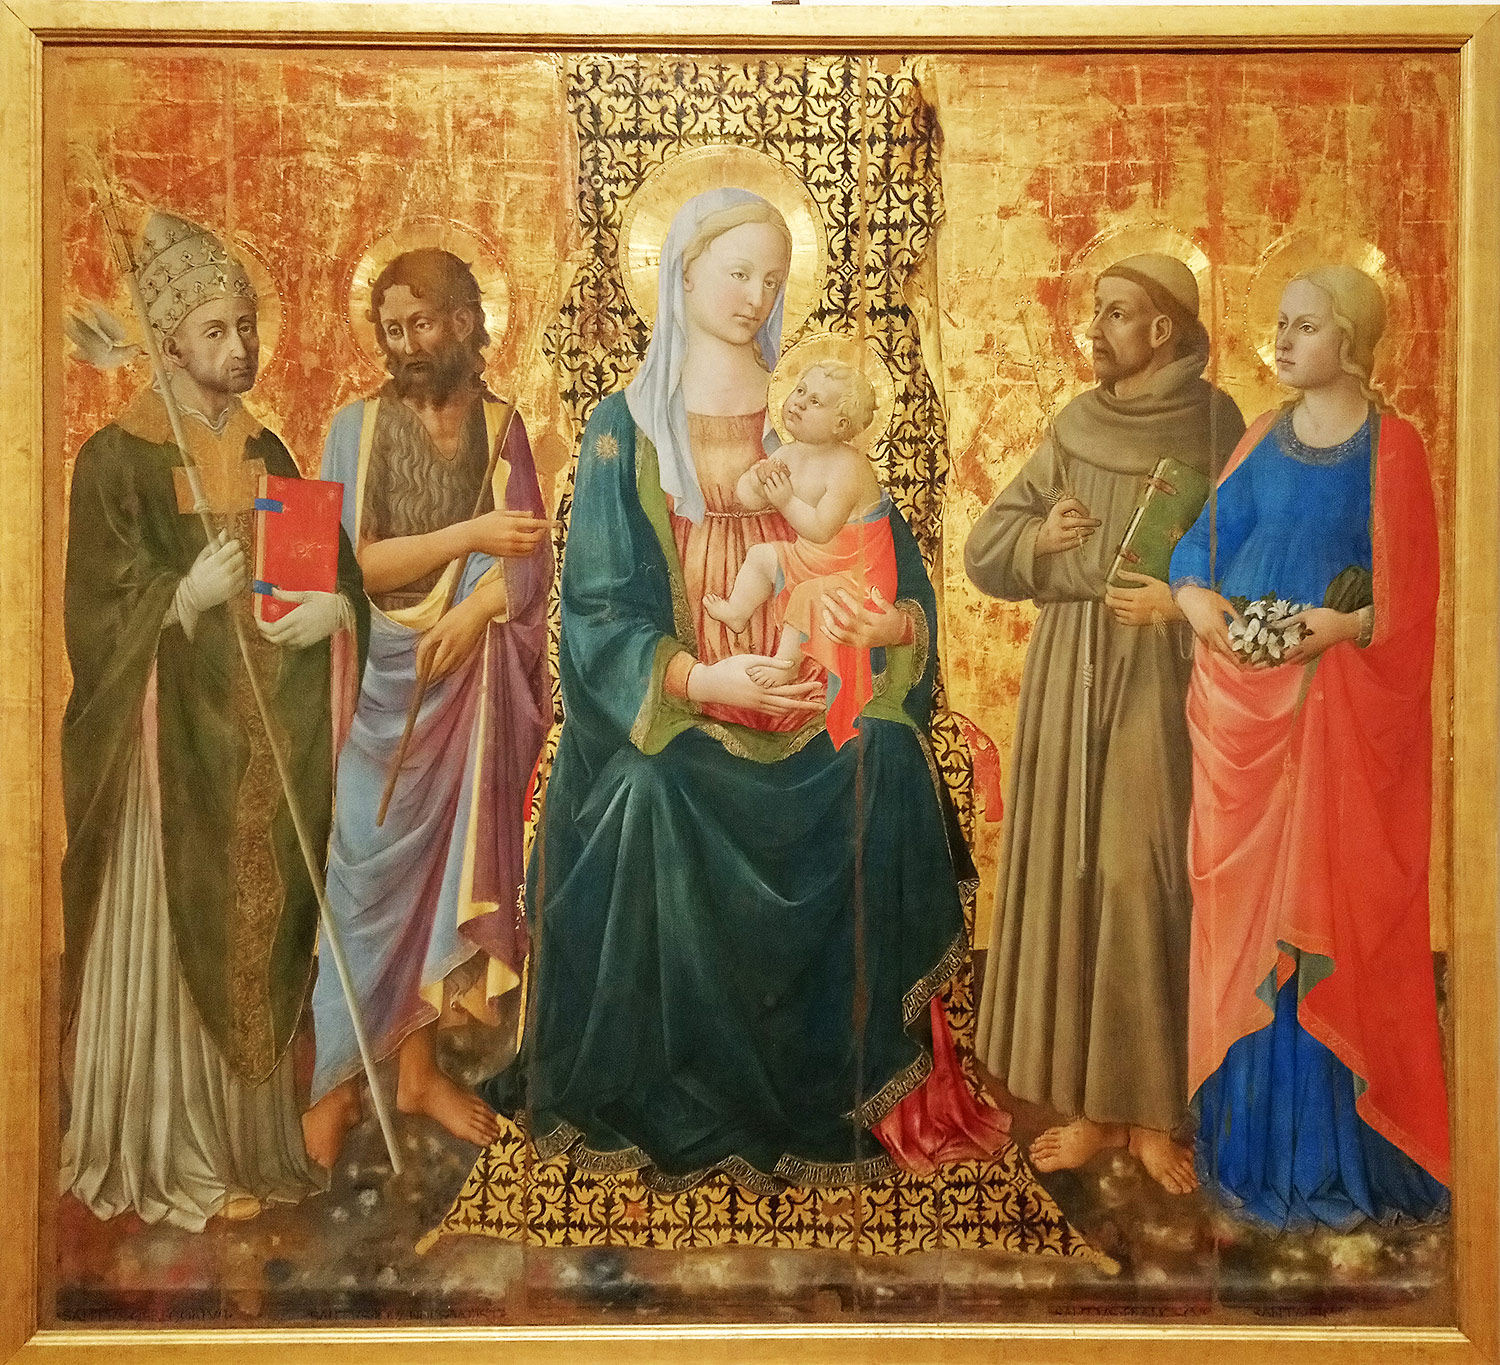 Domenico di Michelino, Madonna and Child with Saints Gregory the Great, John the Baptist, Francis and Fina (1463-1465; tempera on panel; San Gimignano, Civic Museums, Pinacoteca)